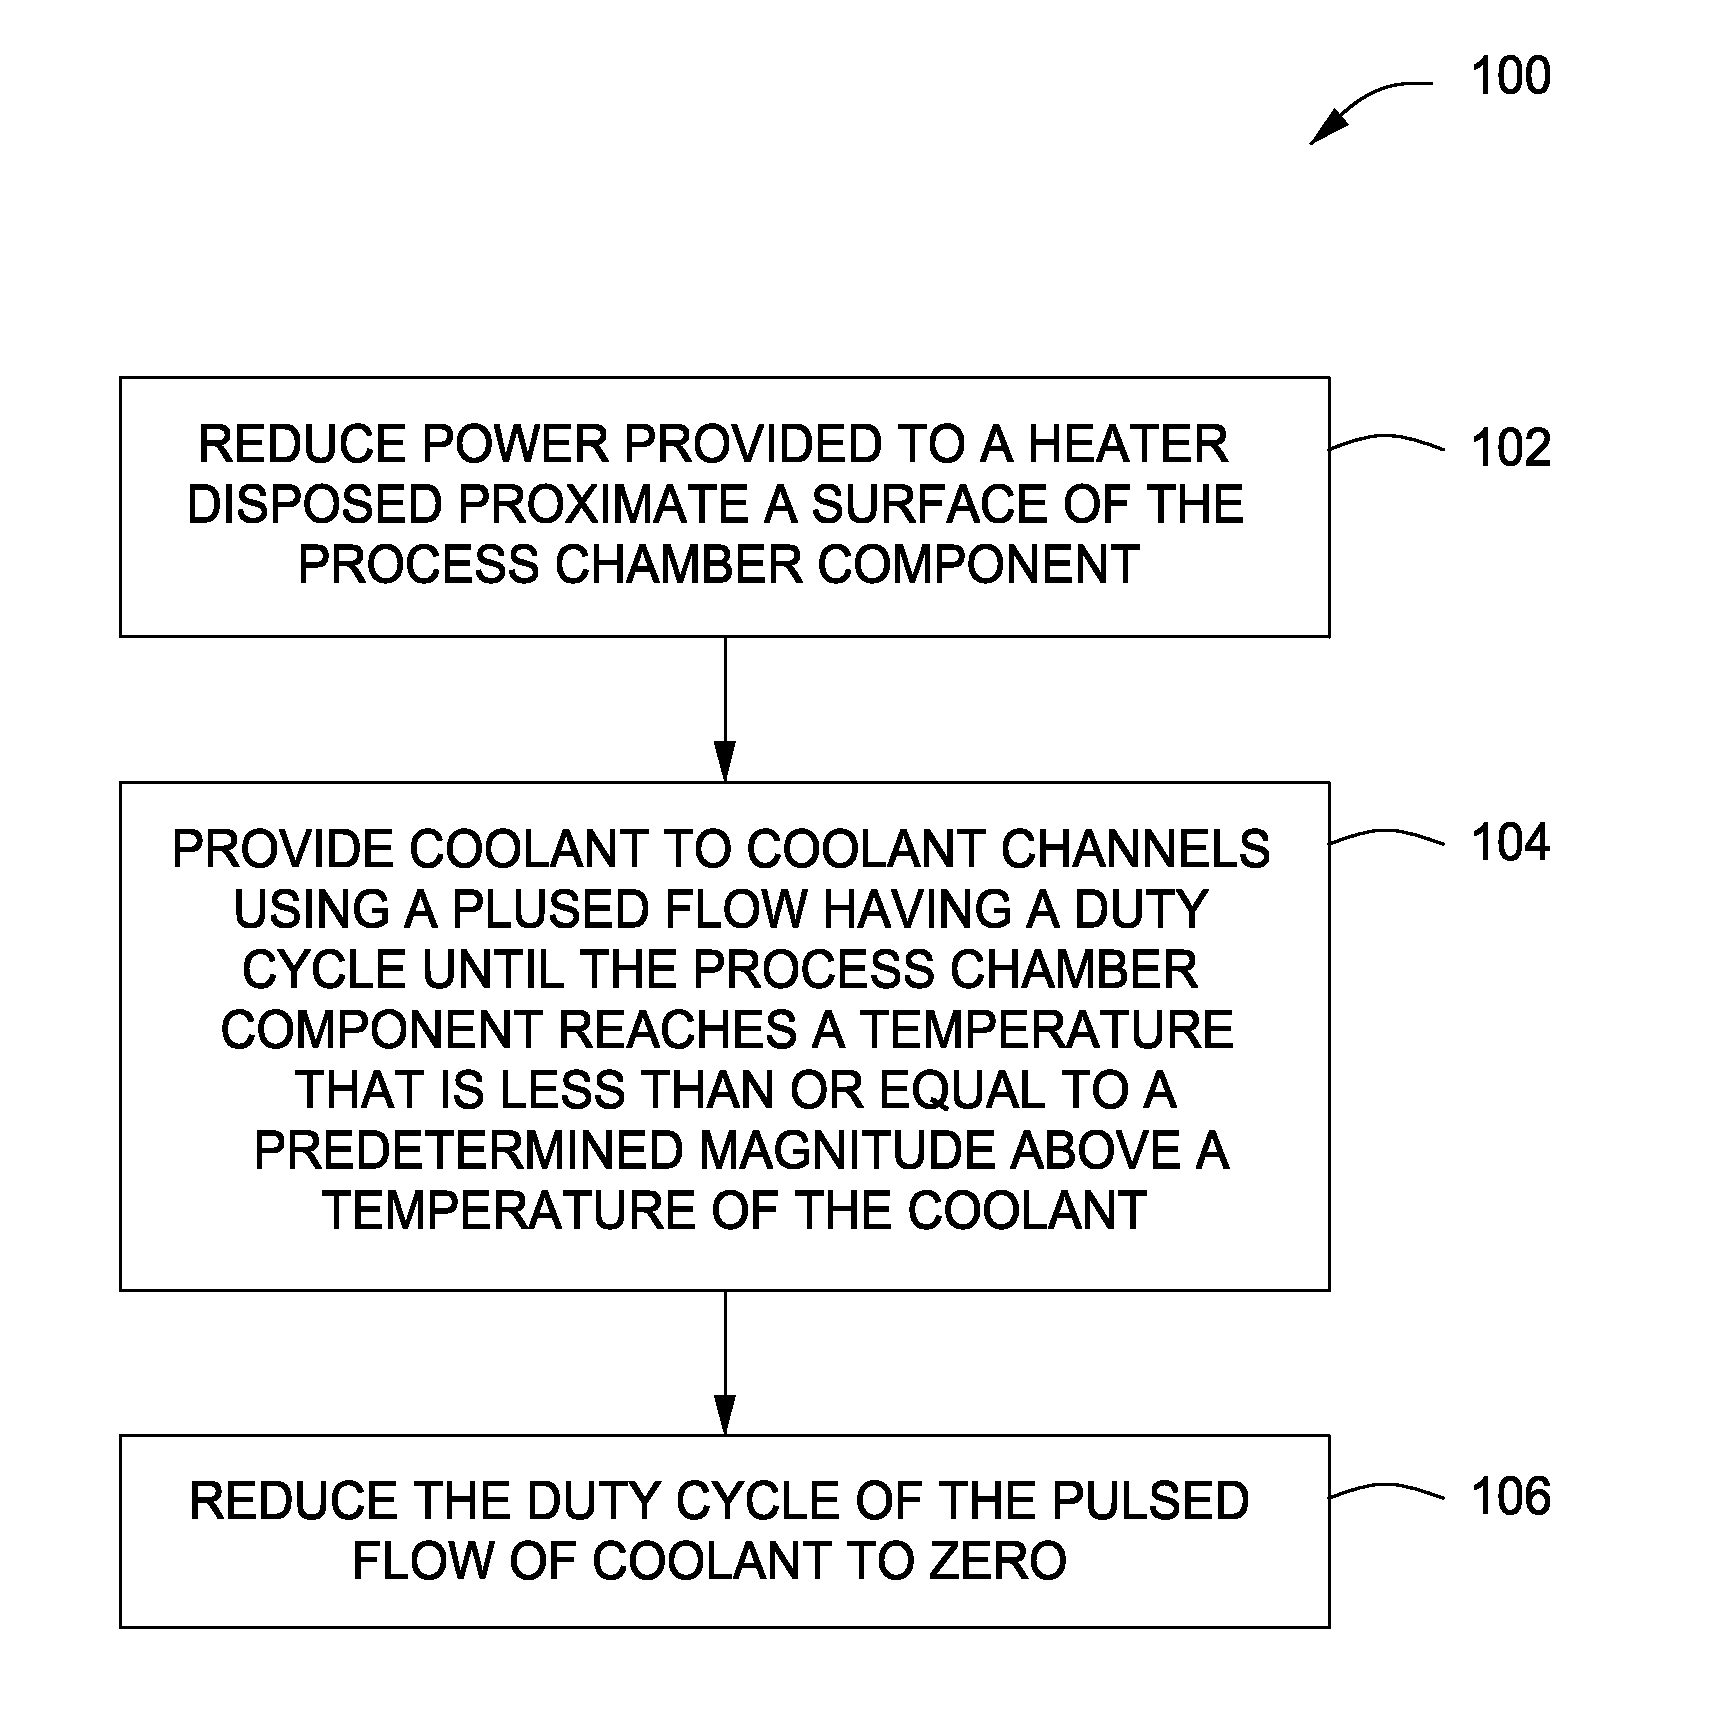 Methods of cooling process chamber components